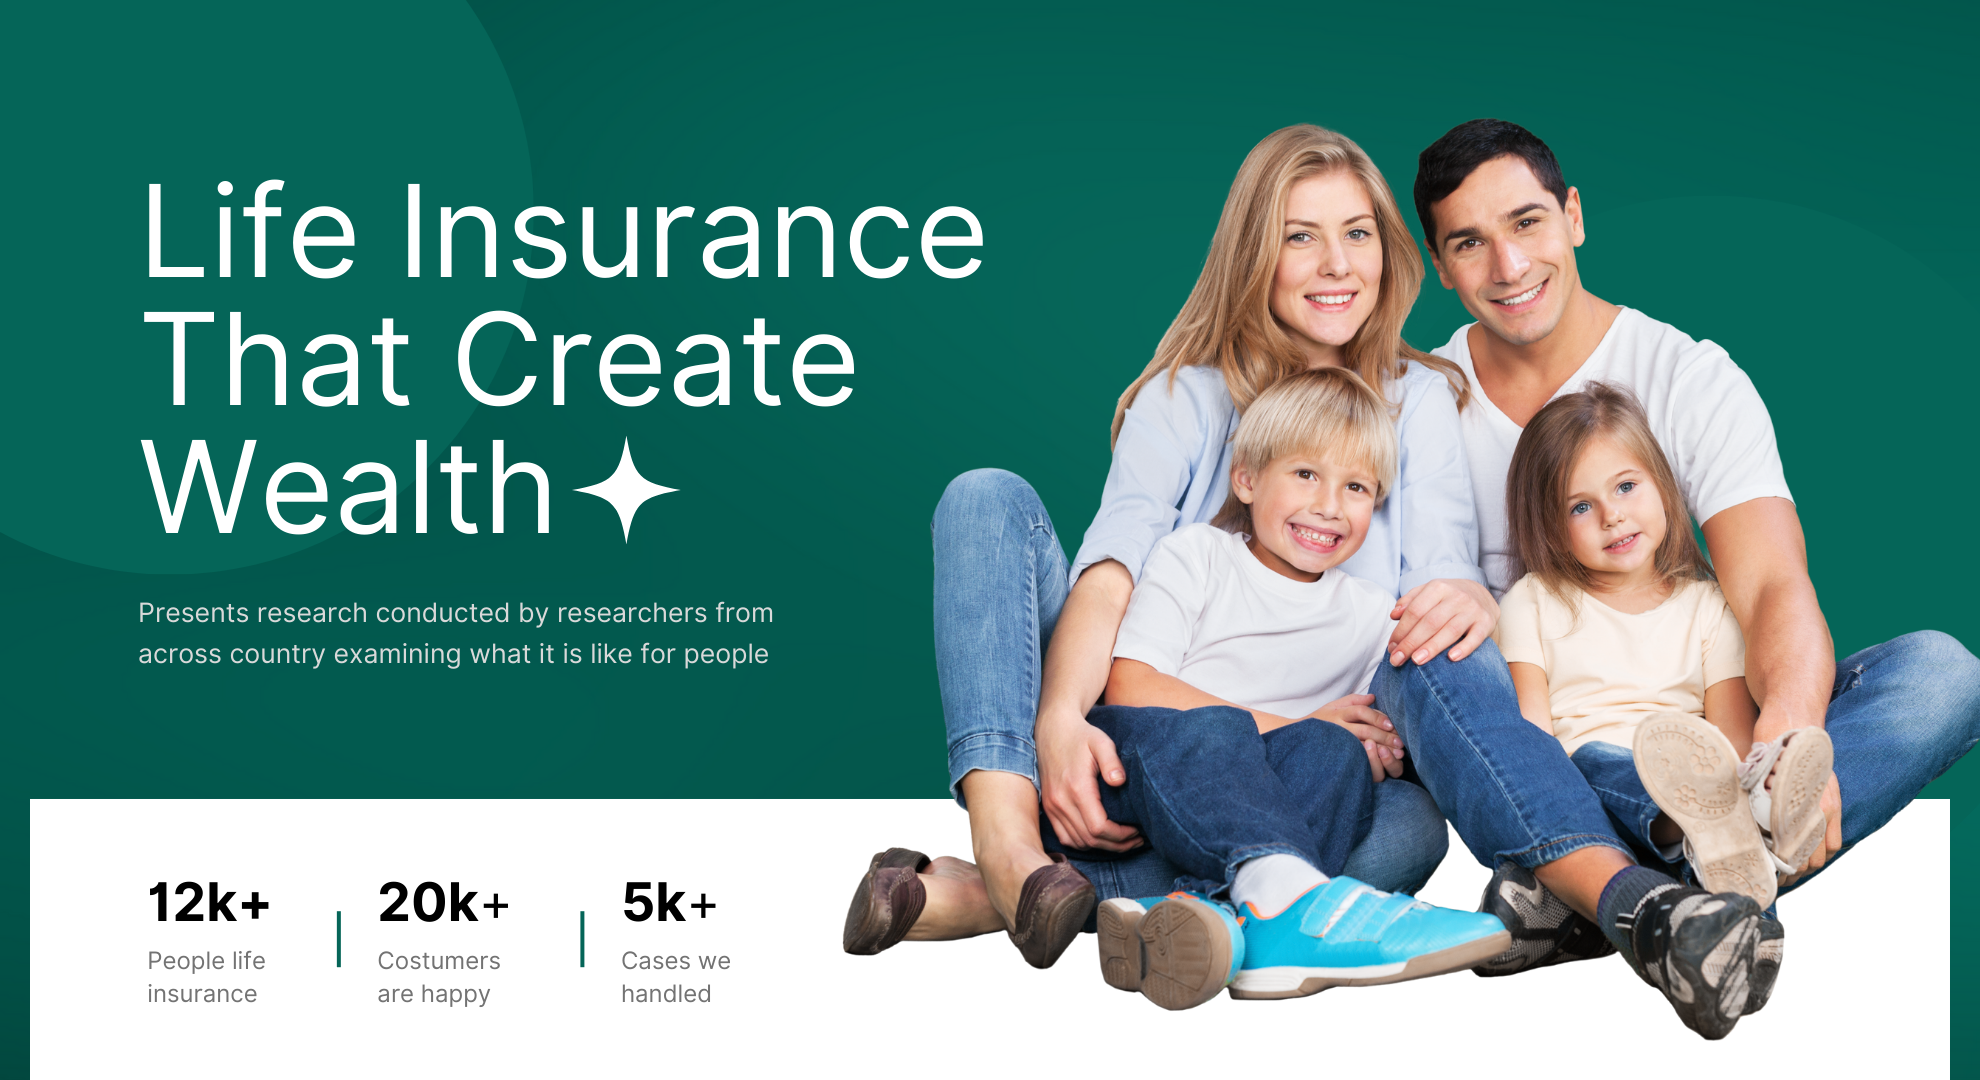 Tips for Making Your Life Insurance Policy More Affordable